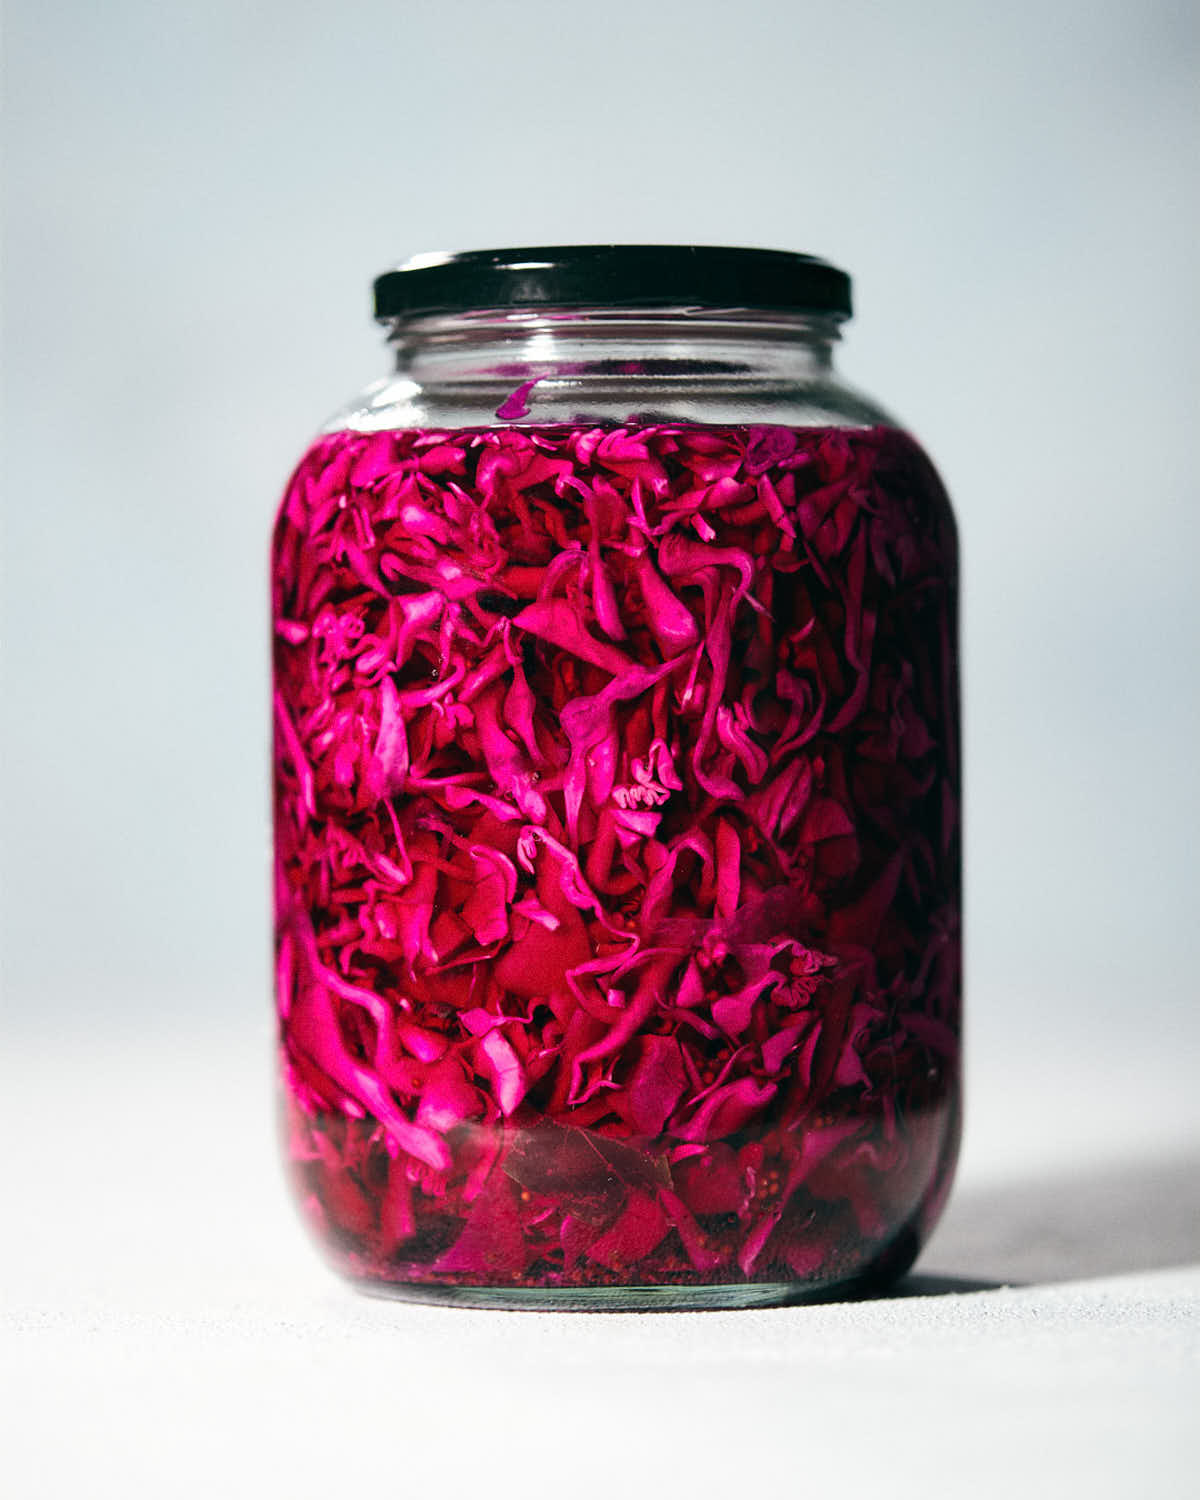 Pickled red cabbage in a jar on the counter